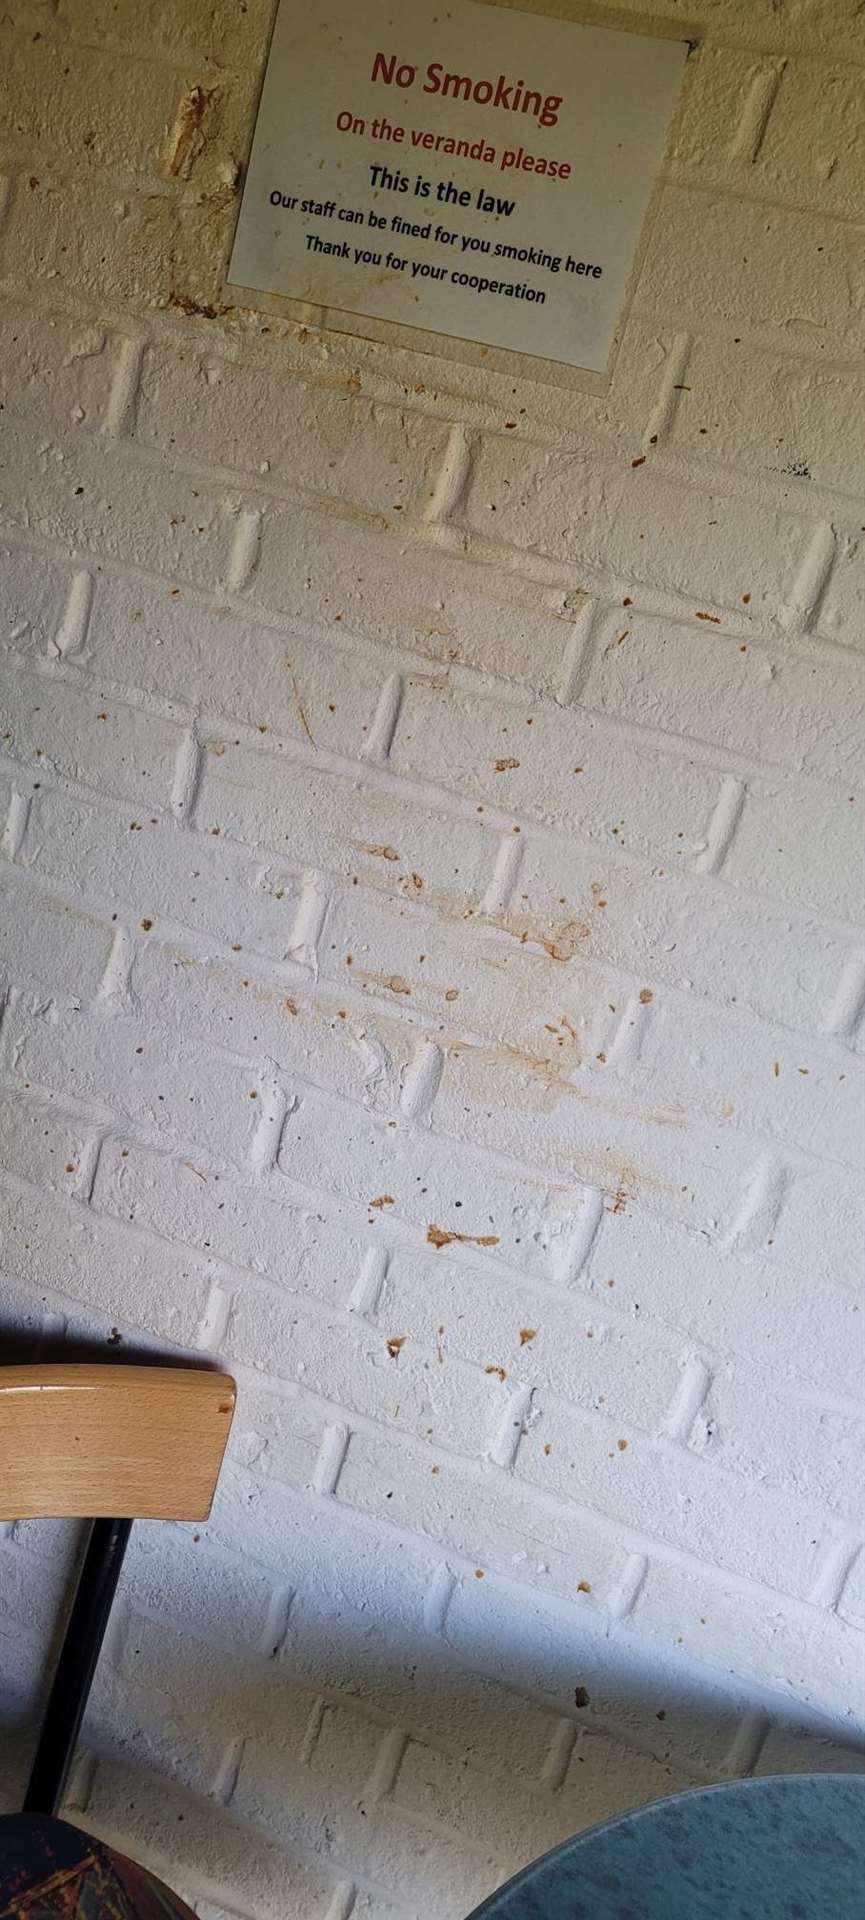 Sauce was left up the wall and on the floor after yobs in Snodland vandalised the Pavillion Café. Picture: Nicola Parker